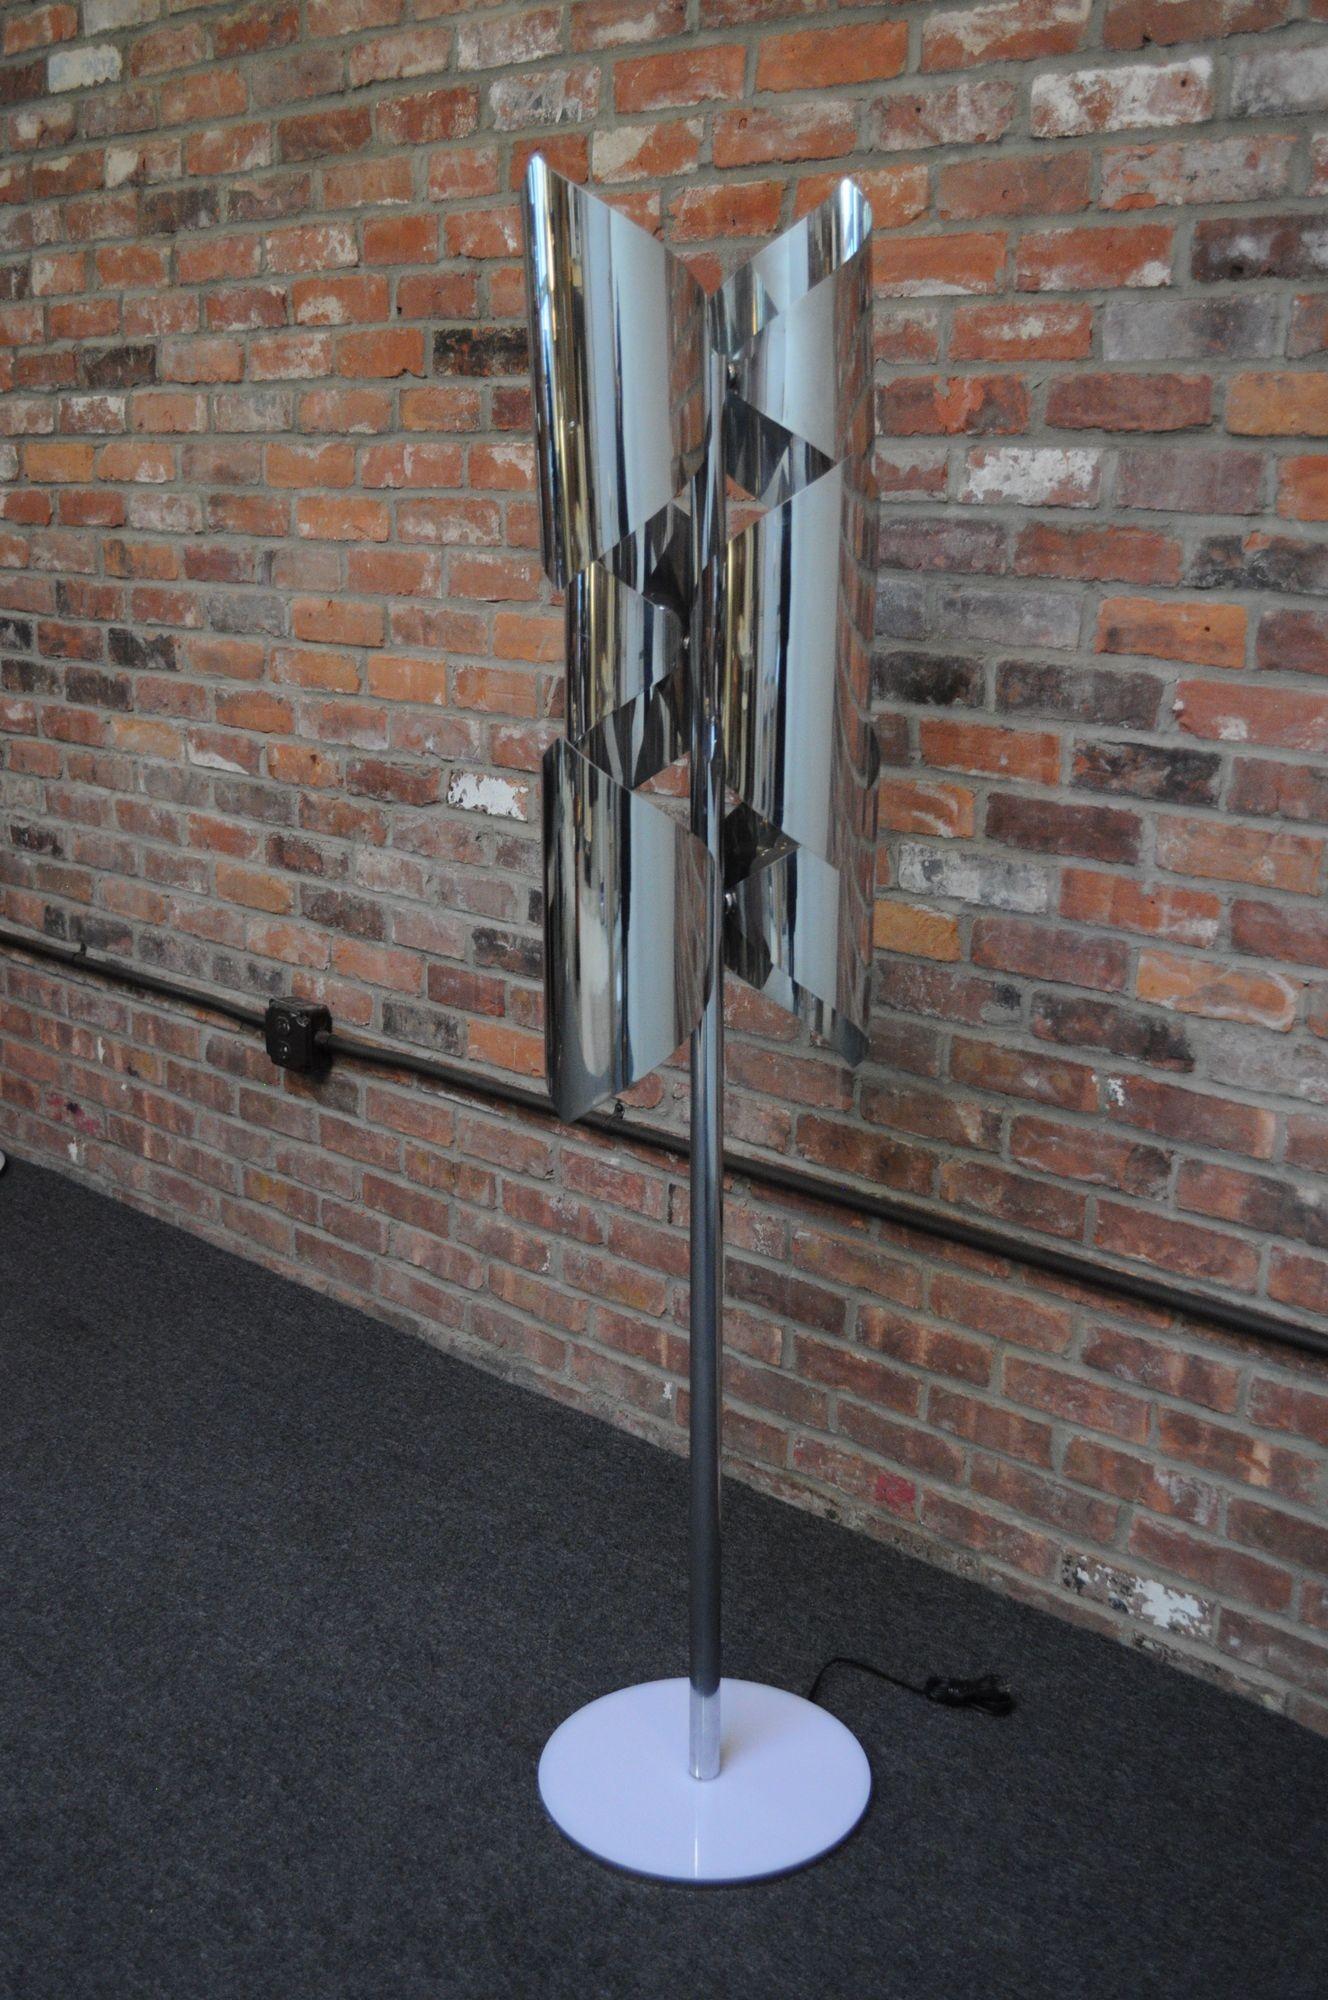 Impressive Italian Space Age-Style chromed-metal floor lamp (ca. 1960s, Italy).
Composed of six shaped chrome fixtures supported by a dense chromed-metal stem and round white acrylic base. (Acrylic disc was likely a later addition added to conceal